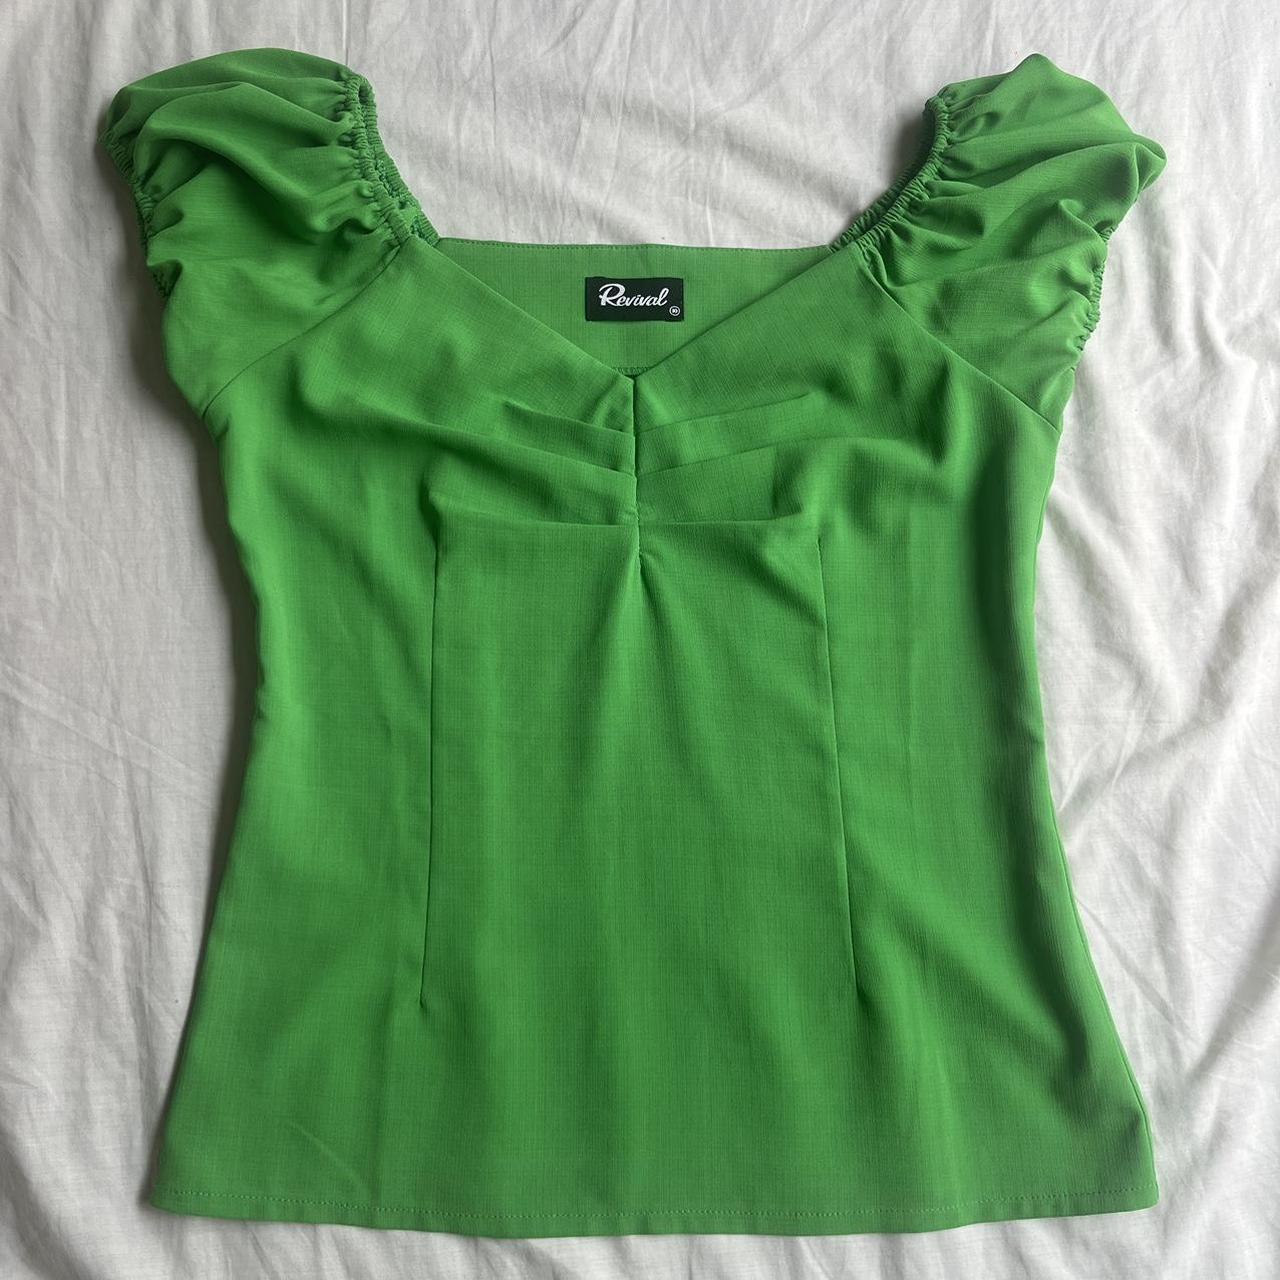 A super sad sell: puff-sleeved blouse/top with... - Depop